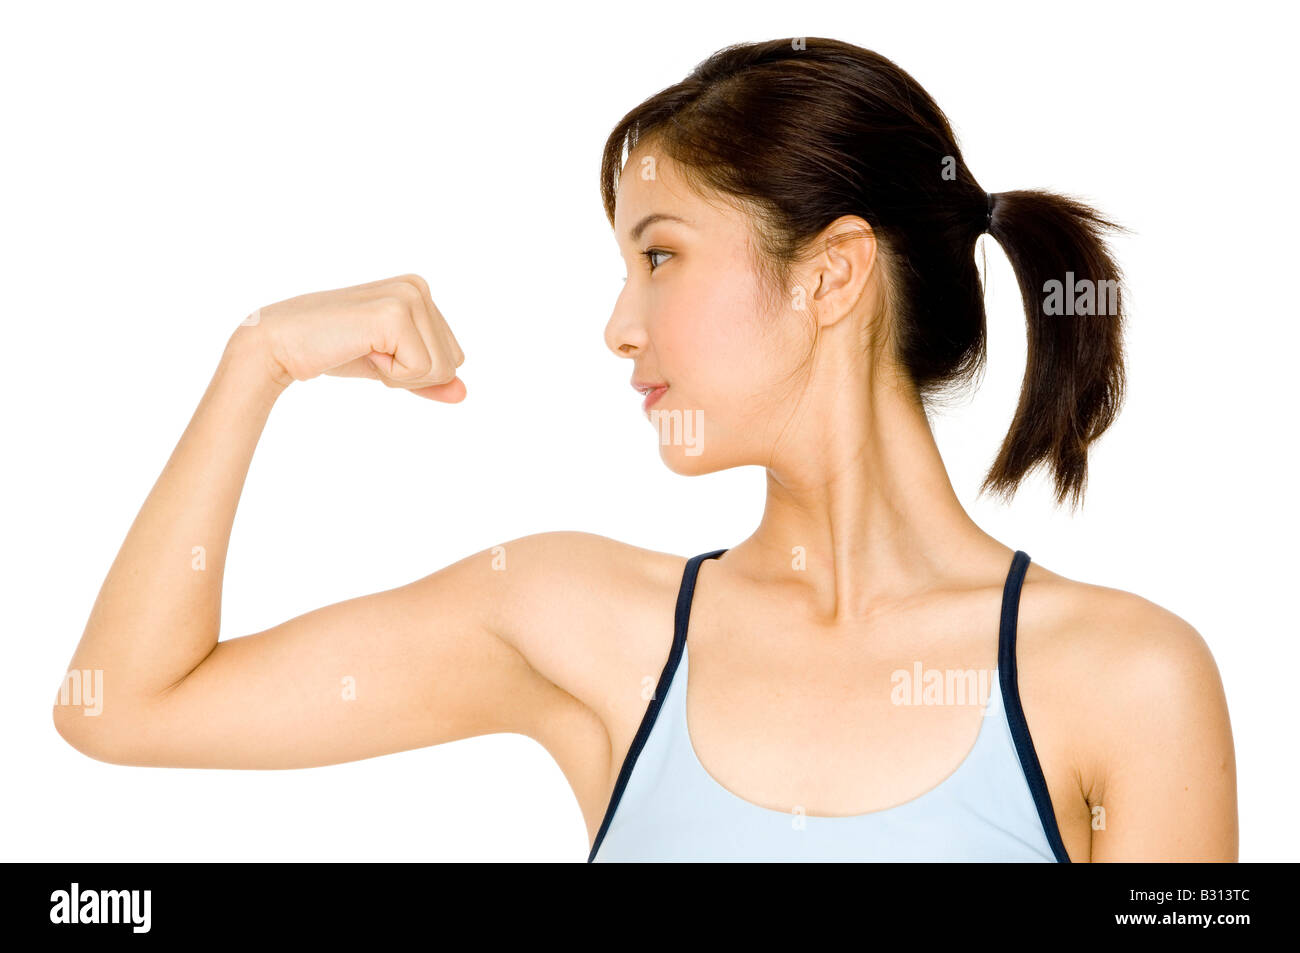 Fit girl flexing bicep. stock photo. Image of beautiful - 124954502